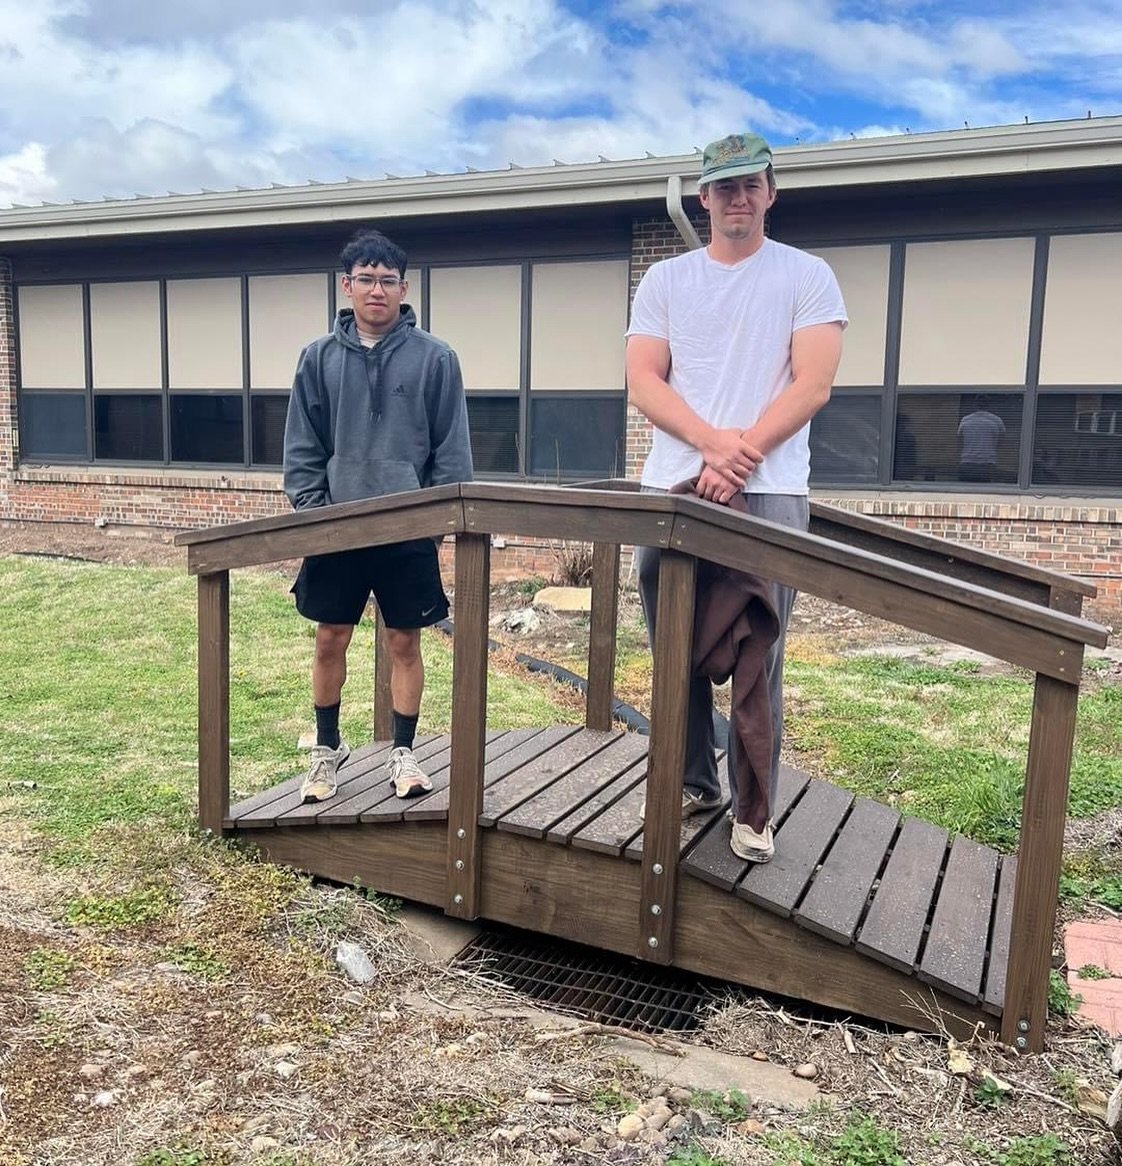 Another great community project coming from the HPTC Construction Program! Gilbert and Cade constructed this bridge in class for their school in Vici! Great work guys!